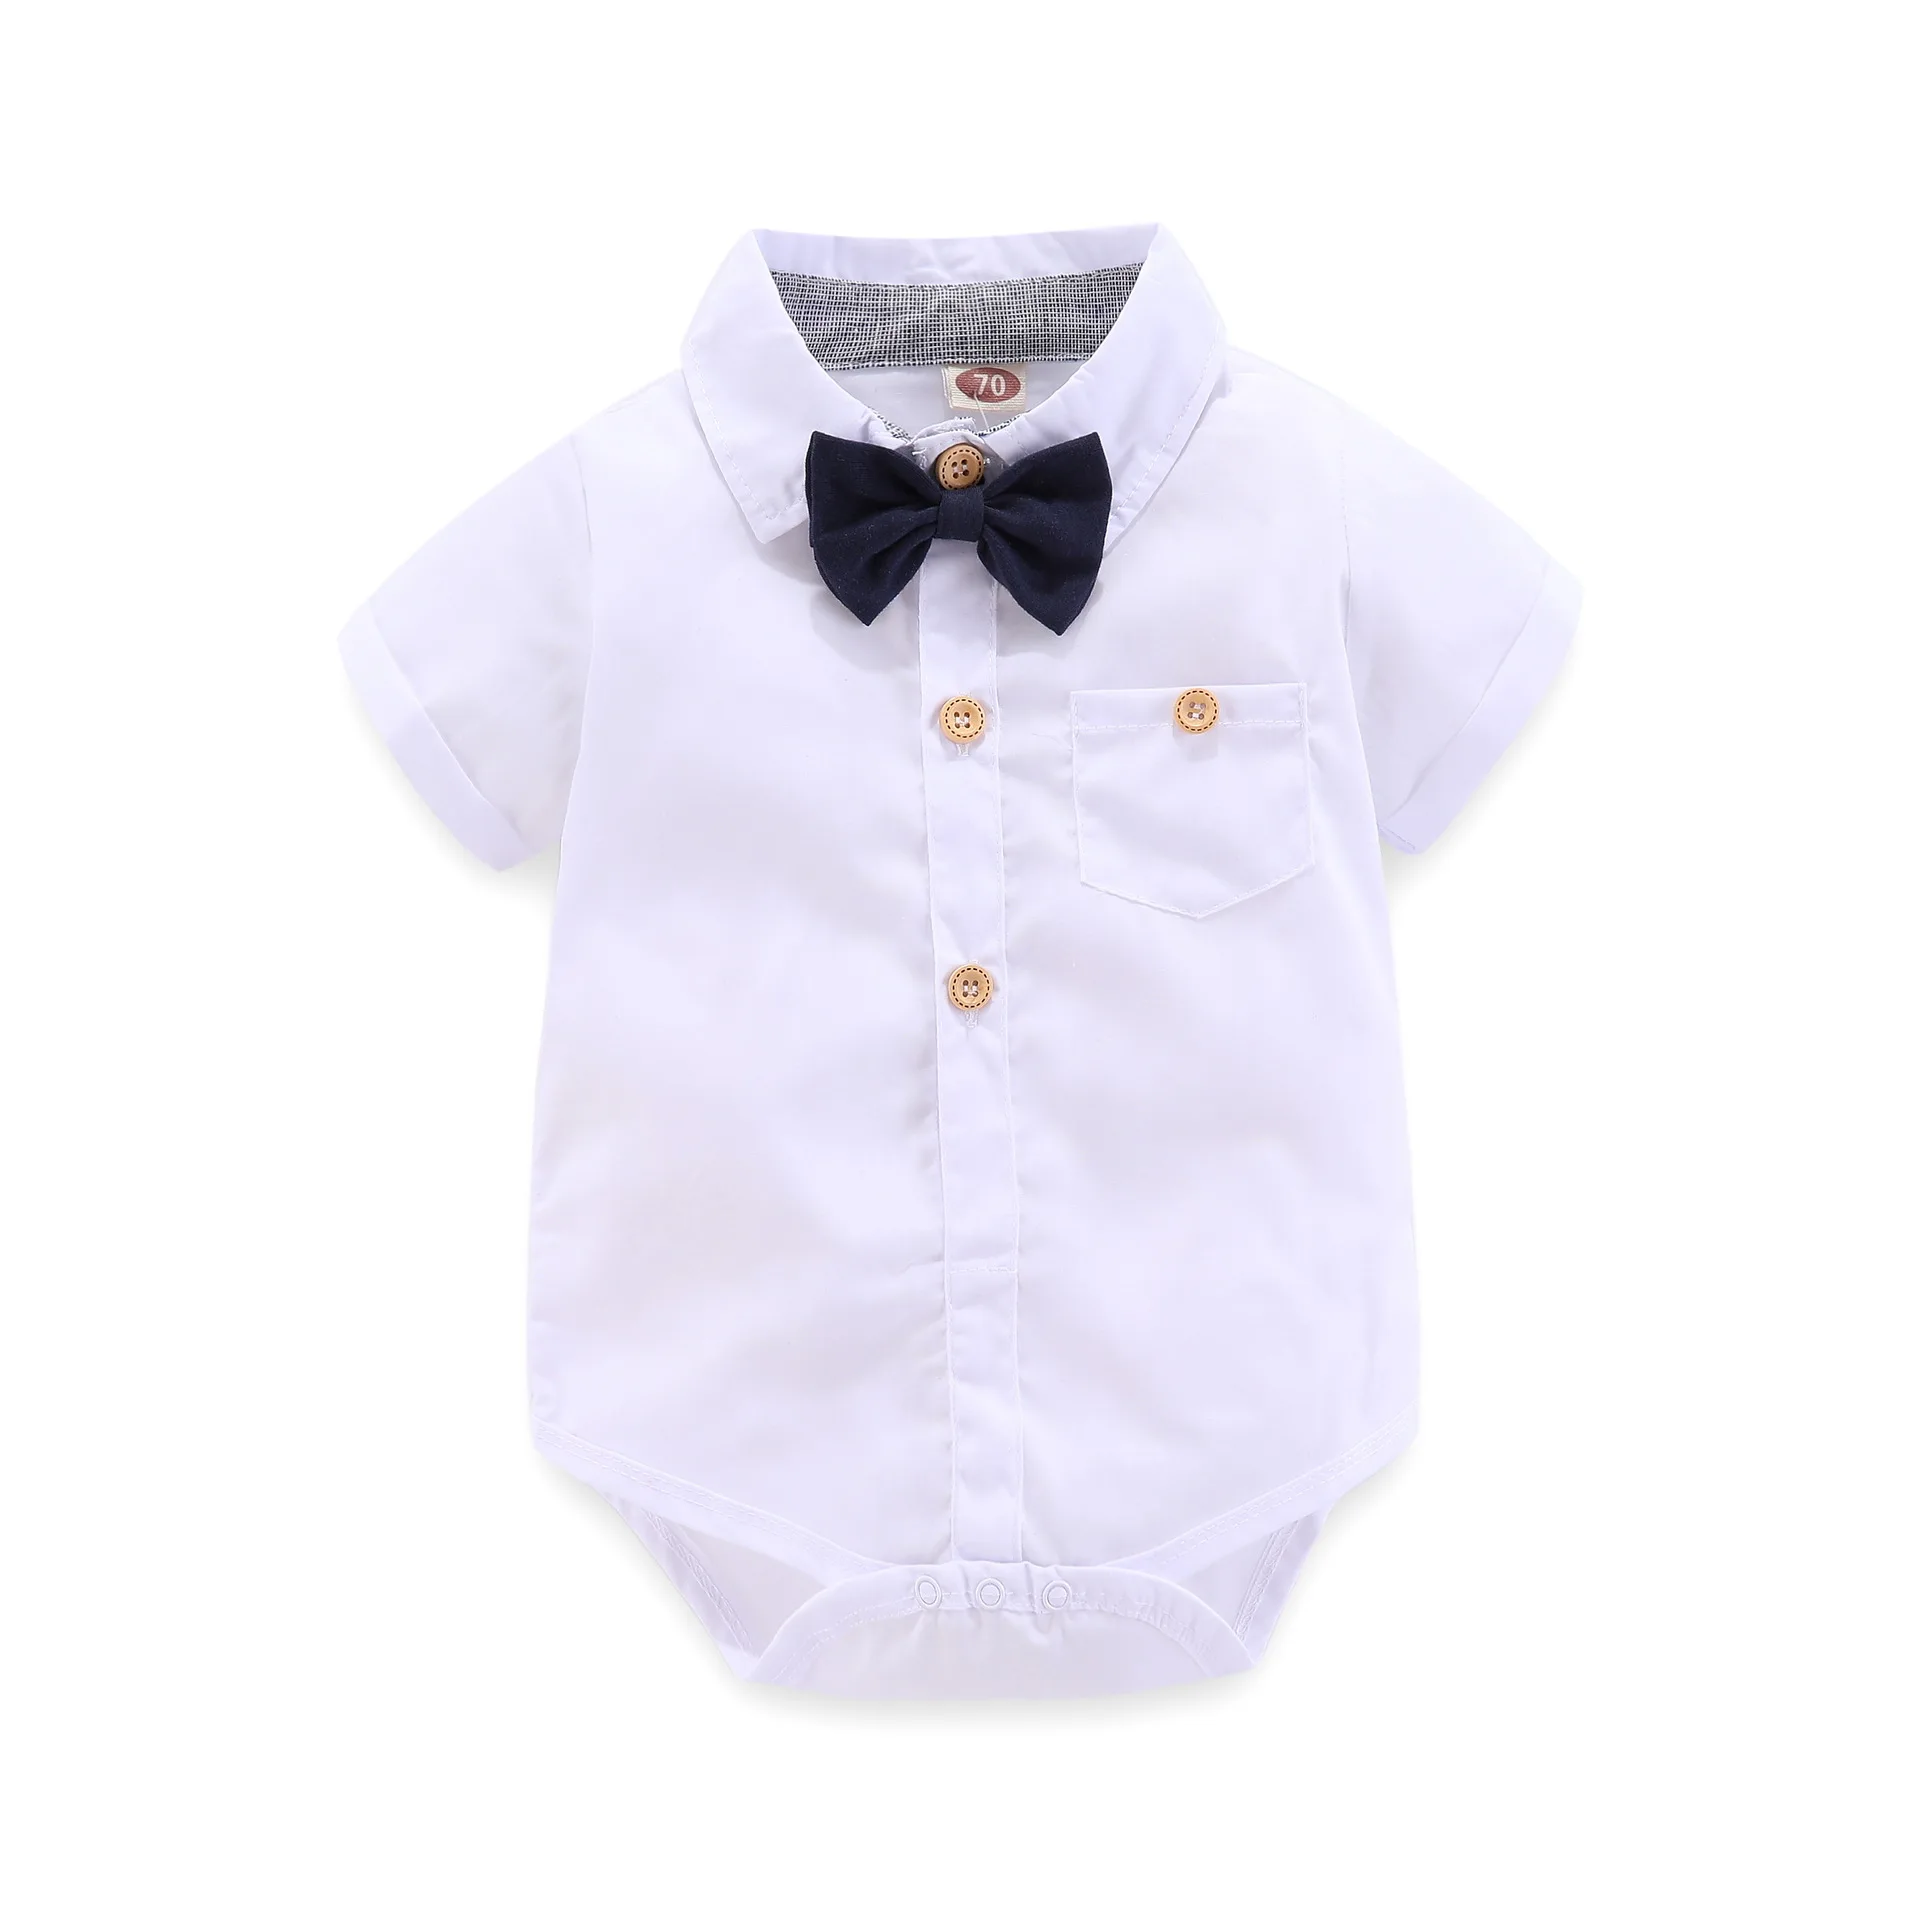 Cym19a1038 Handsome Summer Baby Boy Suit Dress Clothes,Cute Romper 